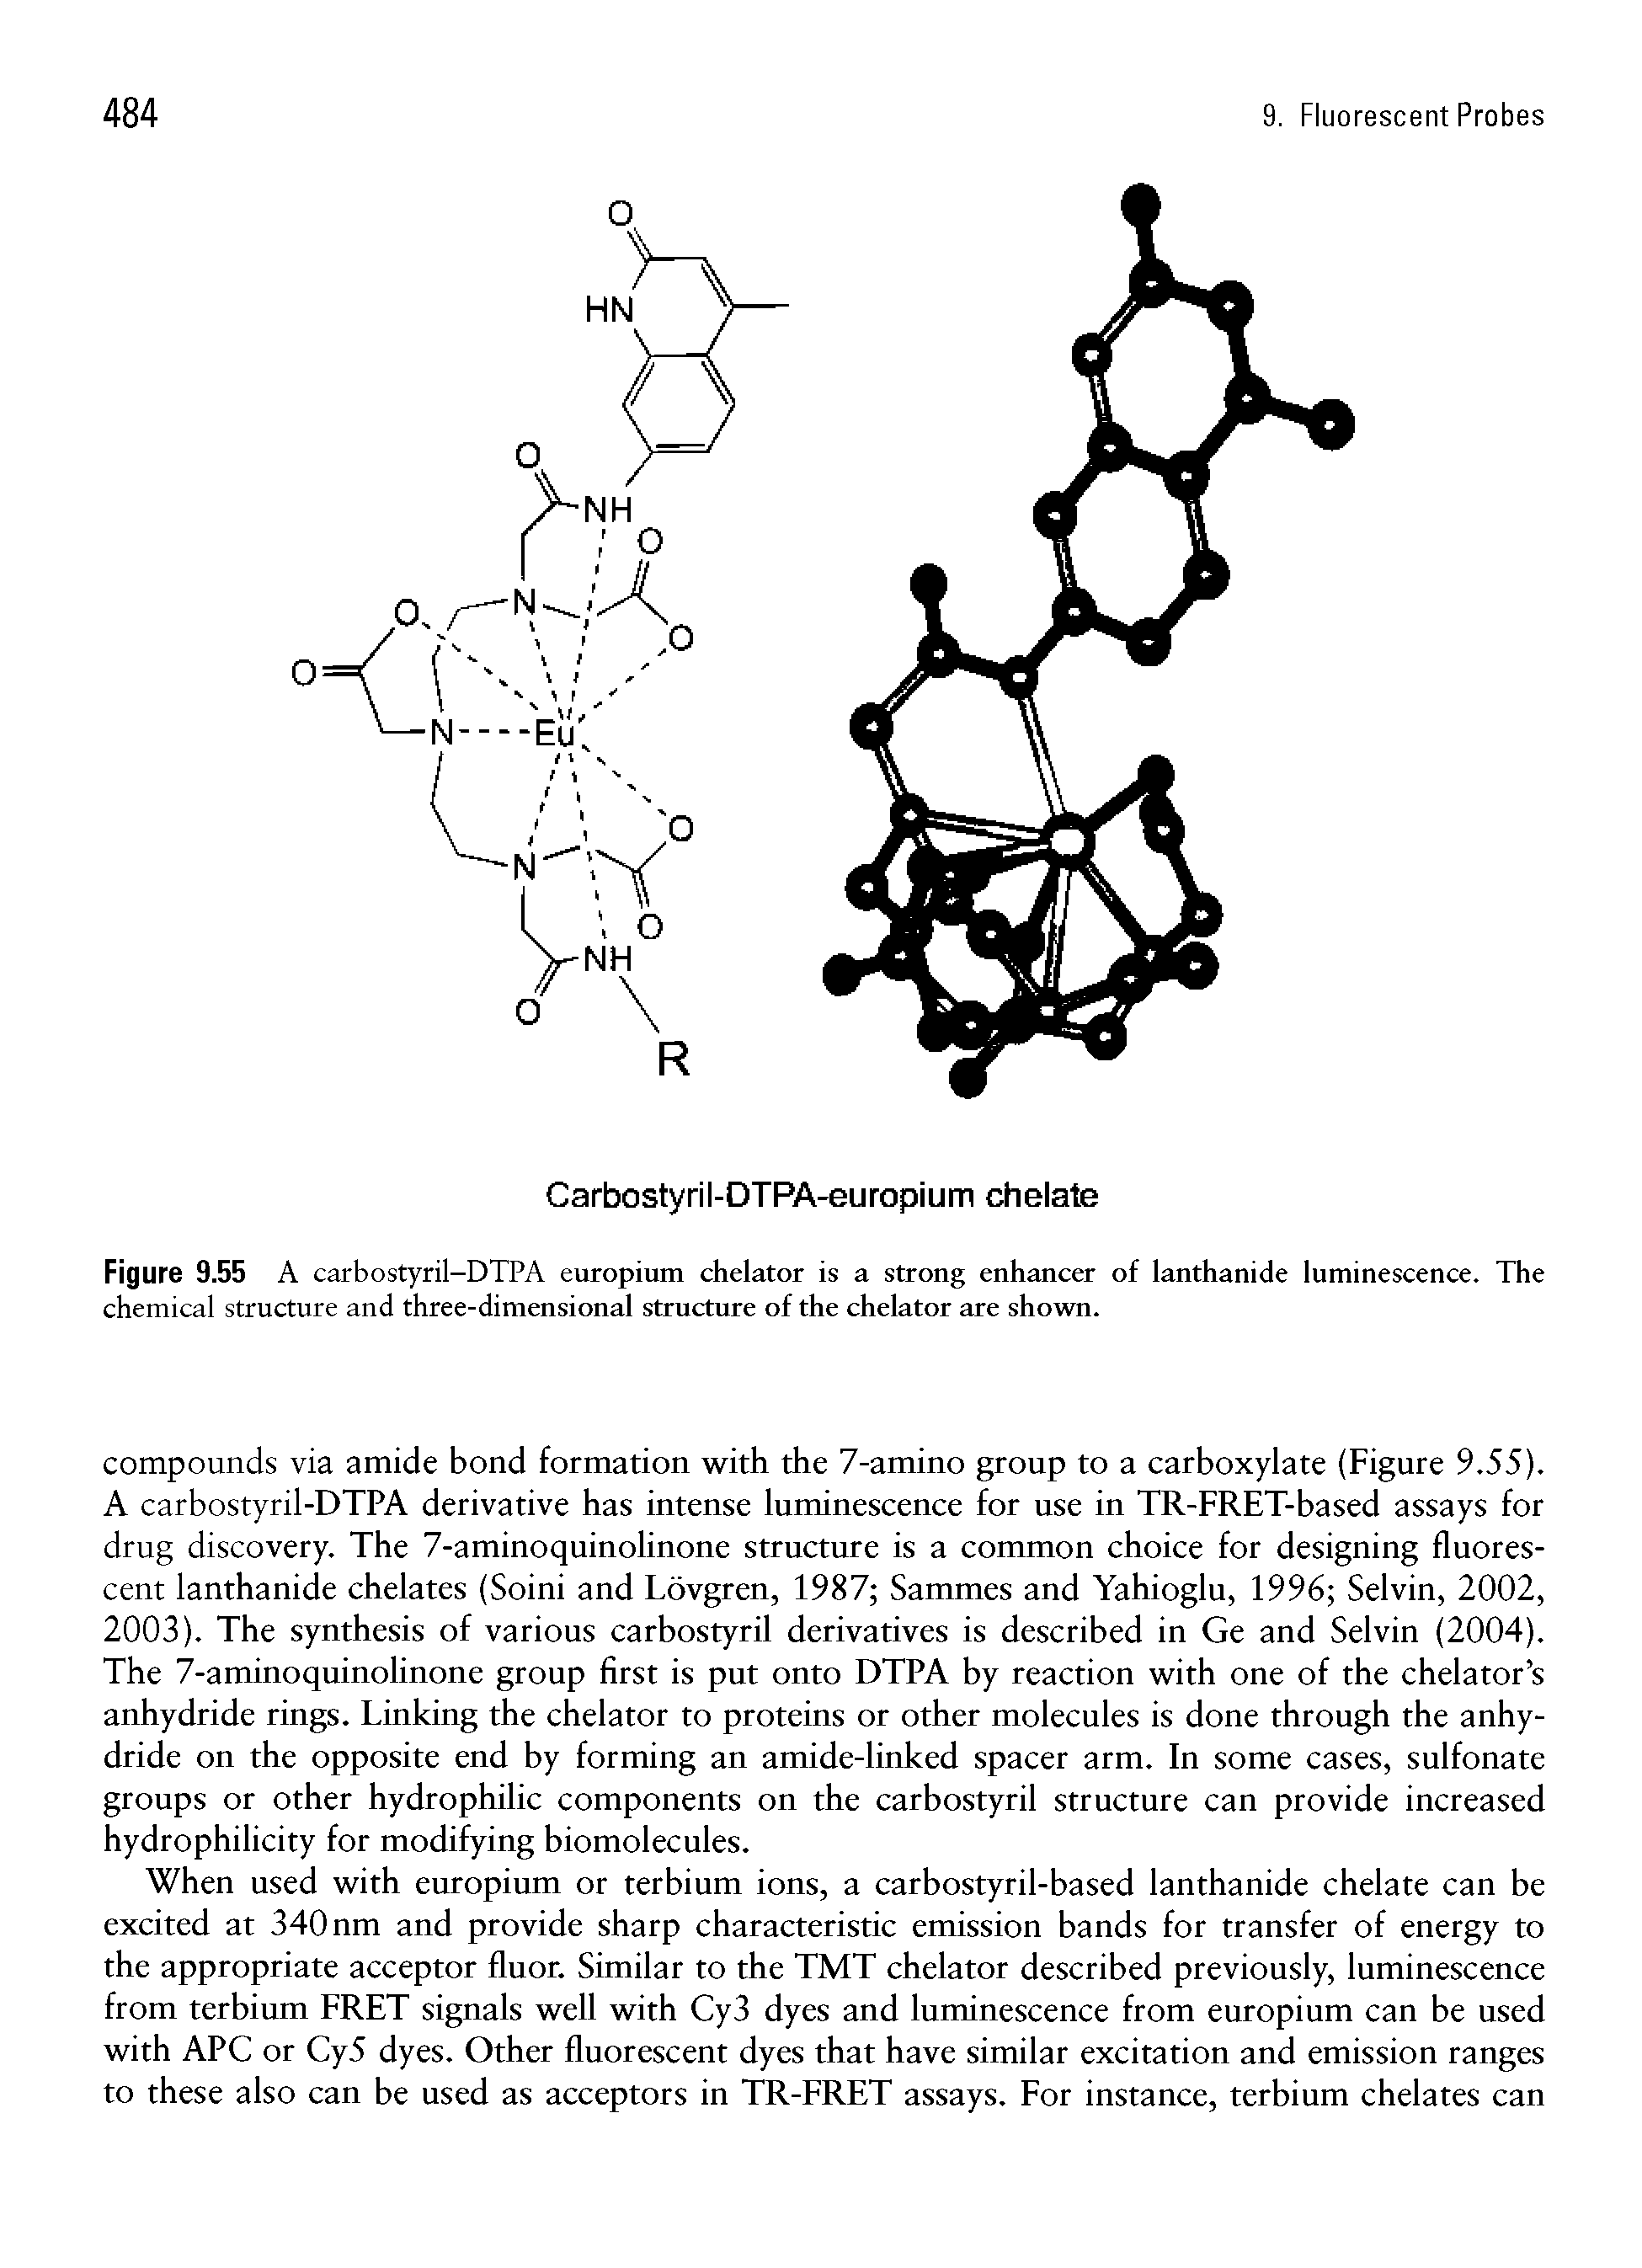 Figure 9.55 A carbostyril-DTPA europium chelator is a strong enhancer of lanthanide luminescence. The chemical structure and three-dimensional structure of the chelator are shown.